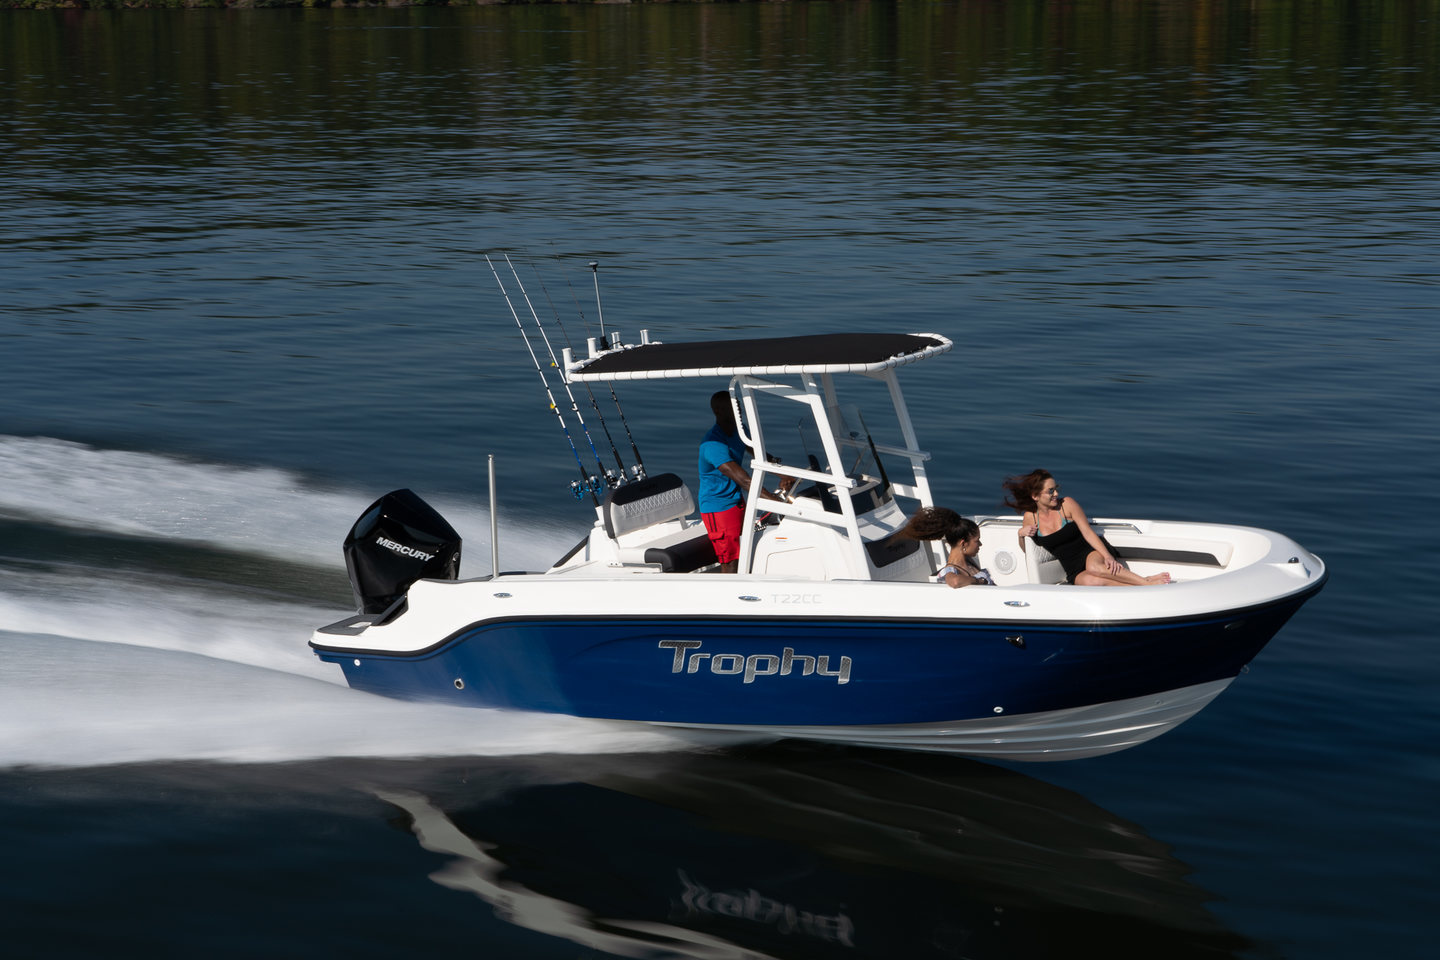 360 VR Virtual Tours of the Bayliner Trophy T22CC